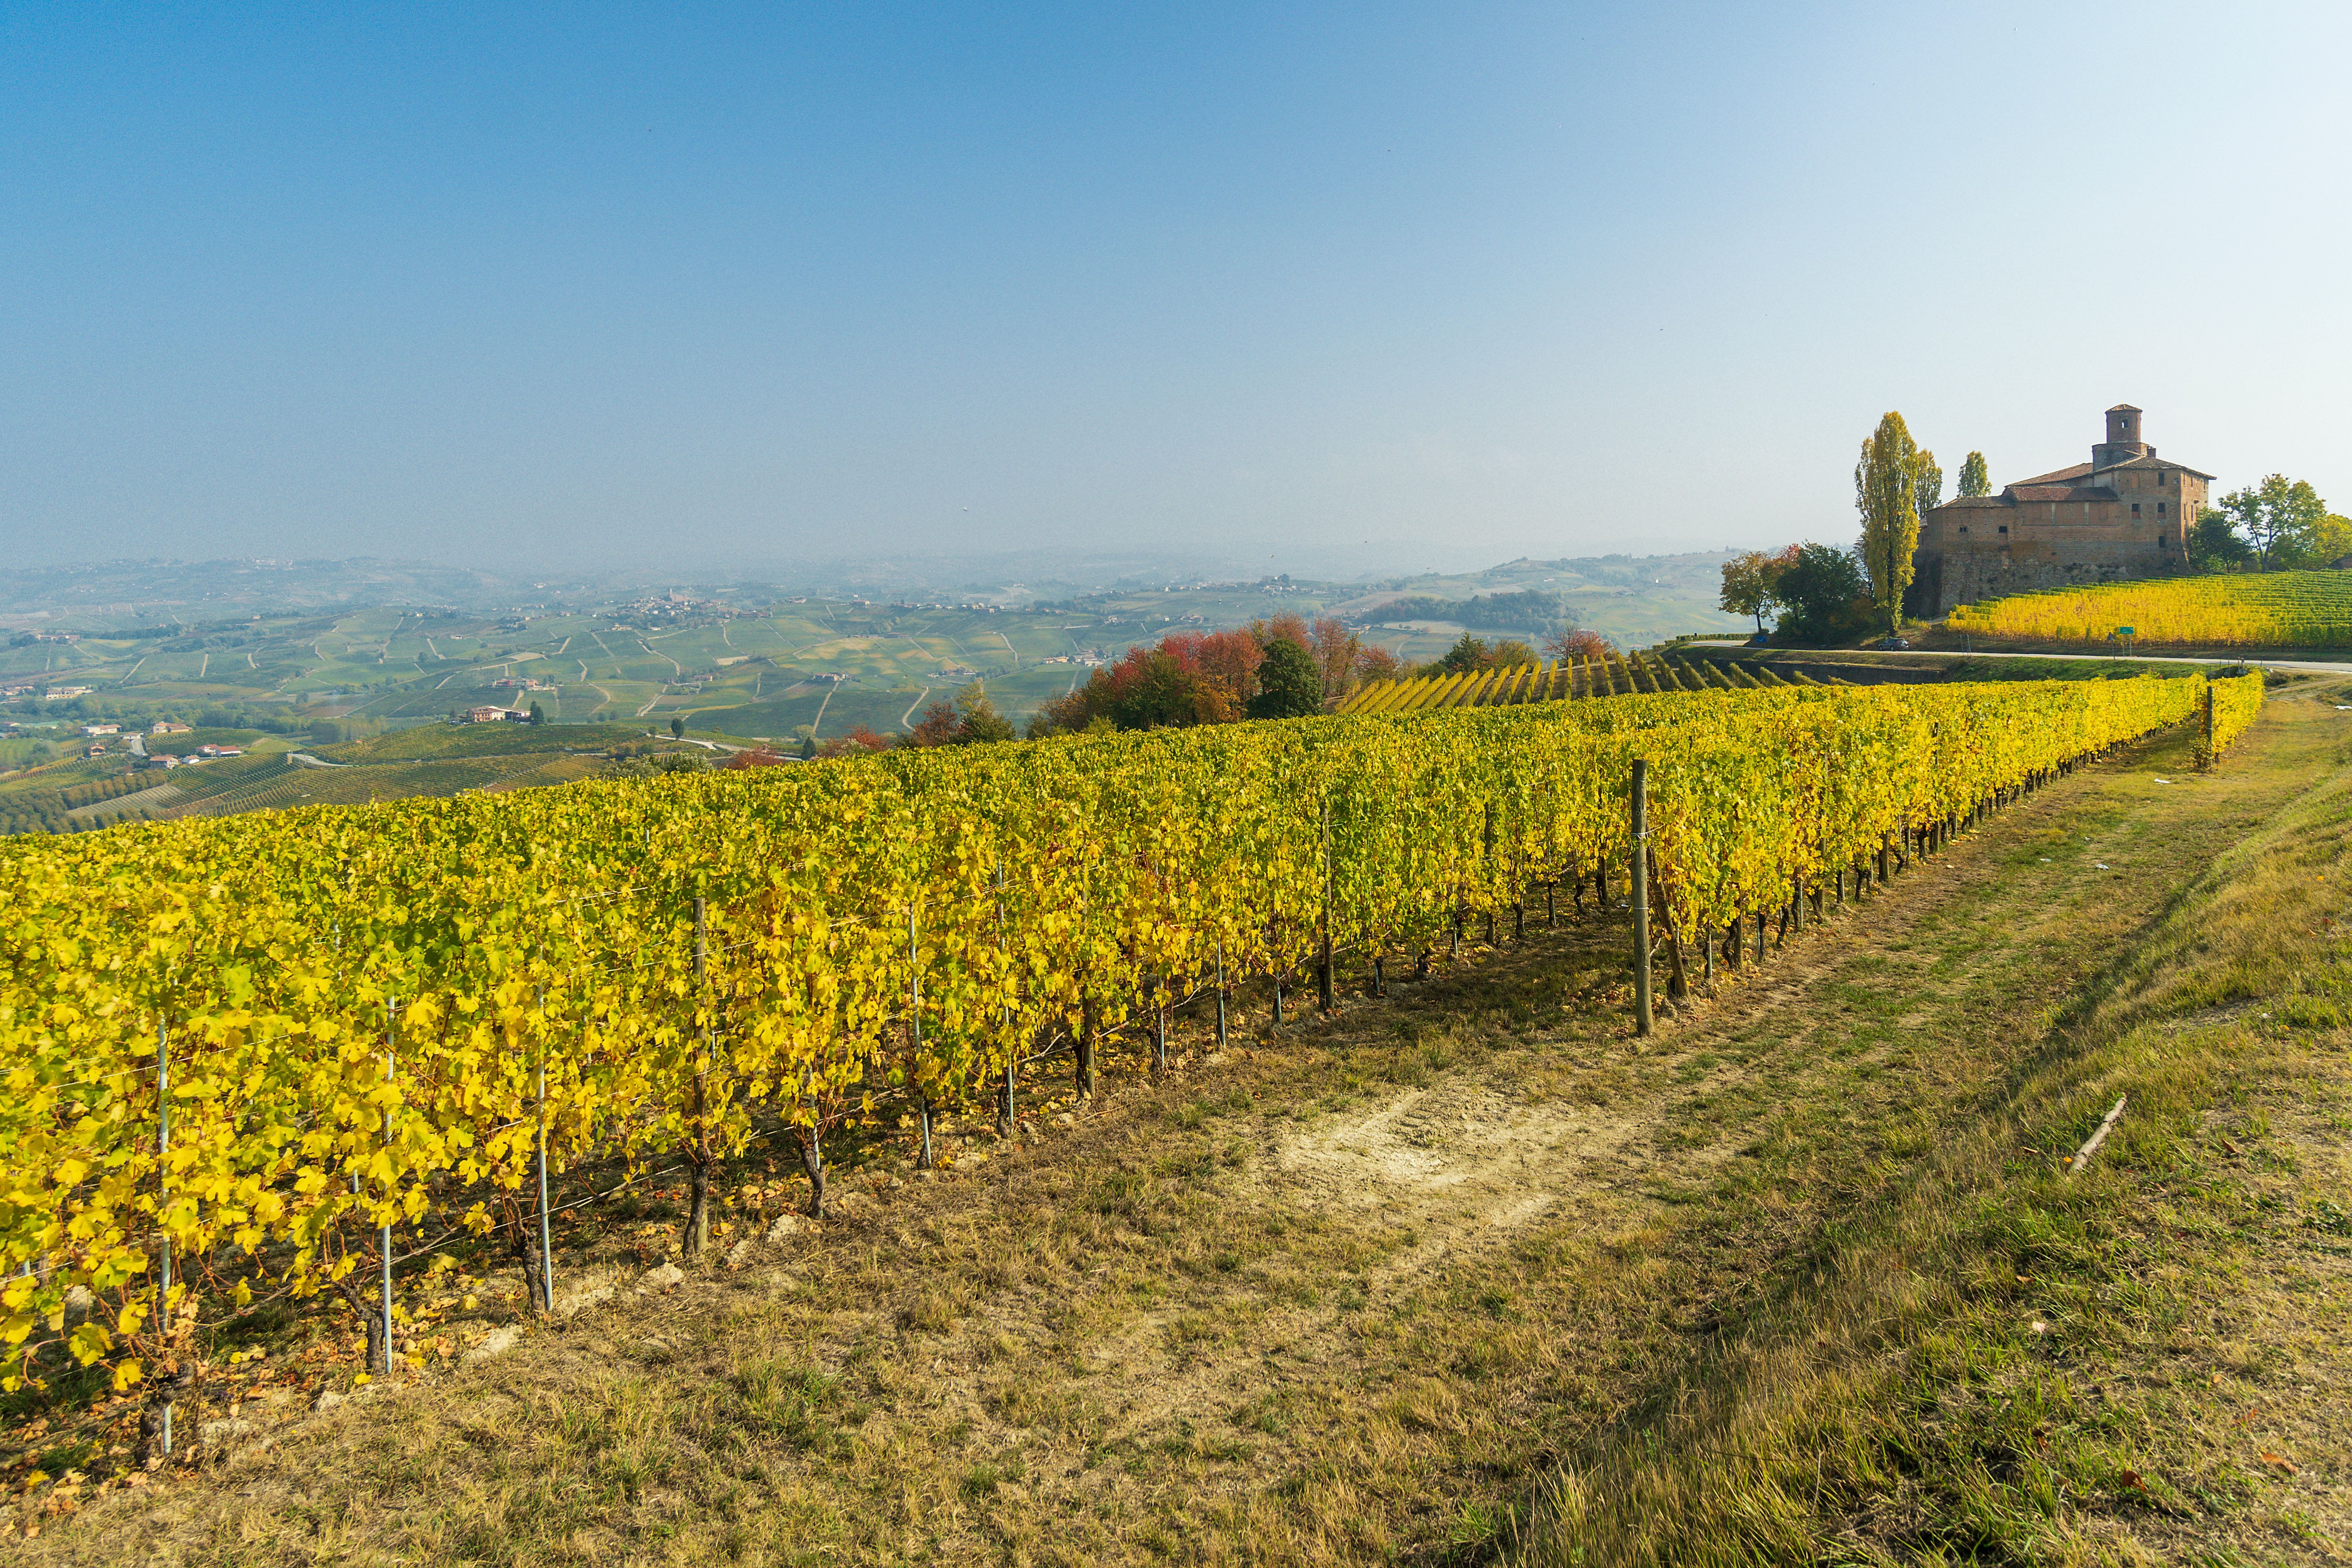 Autumn adventures in Piedmont with the family